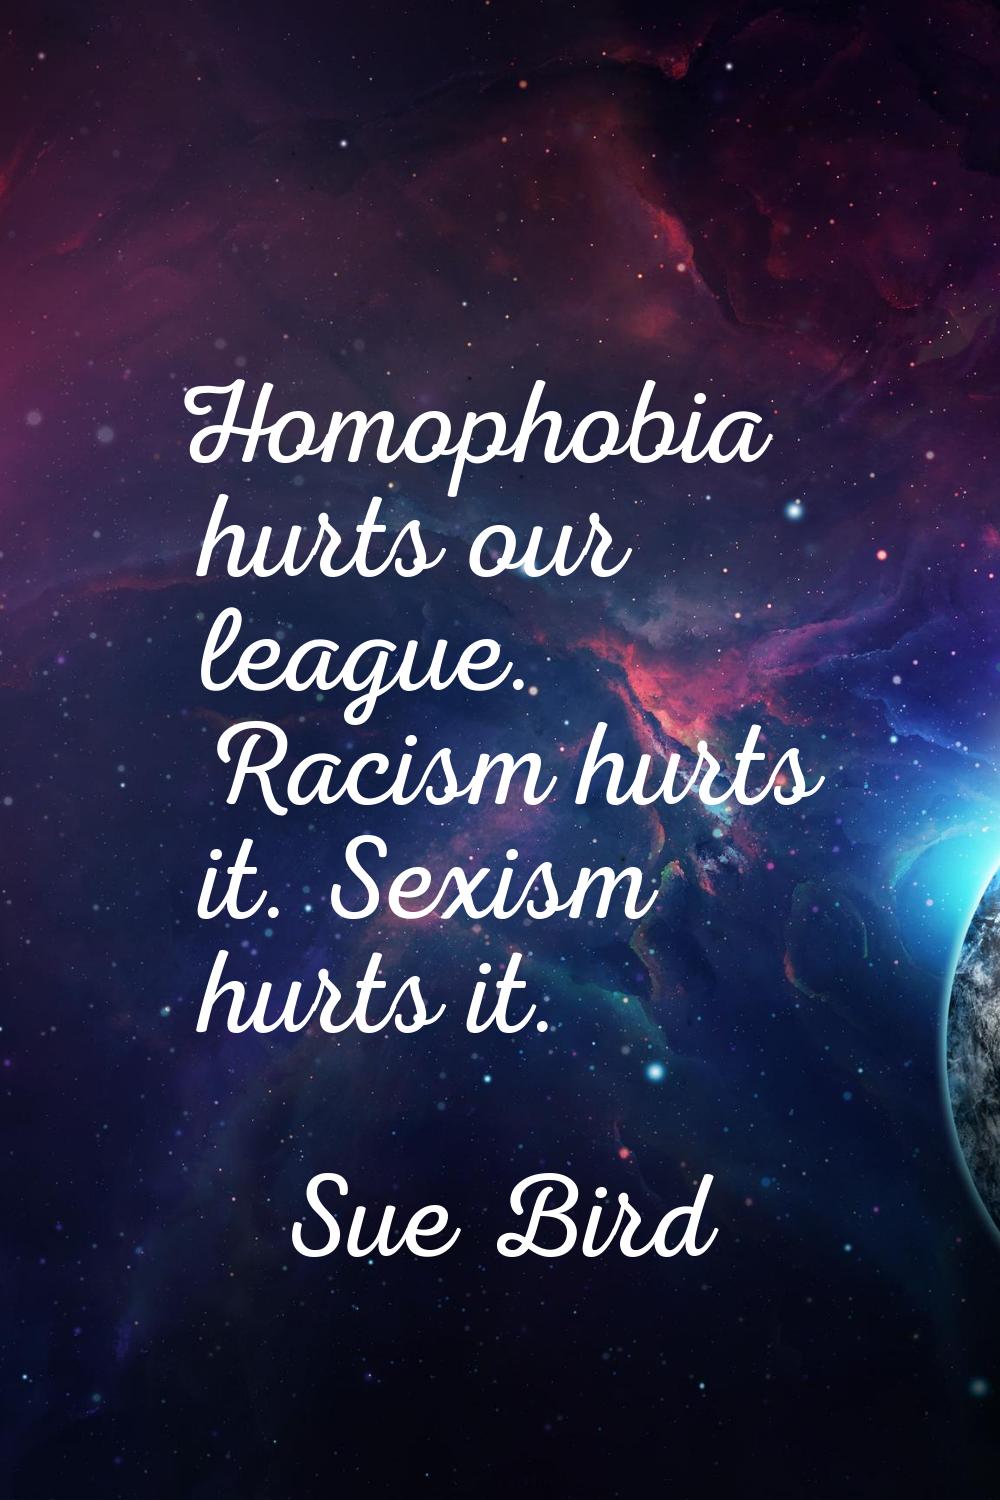 Homophobia hurts our league. Racism hurts it. Sexism hurts it.